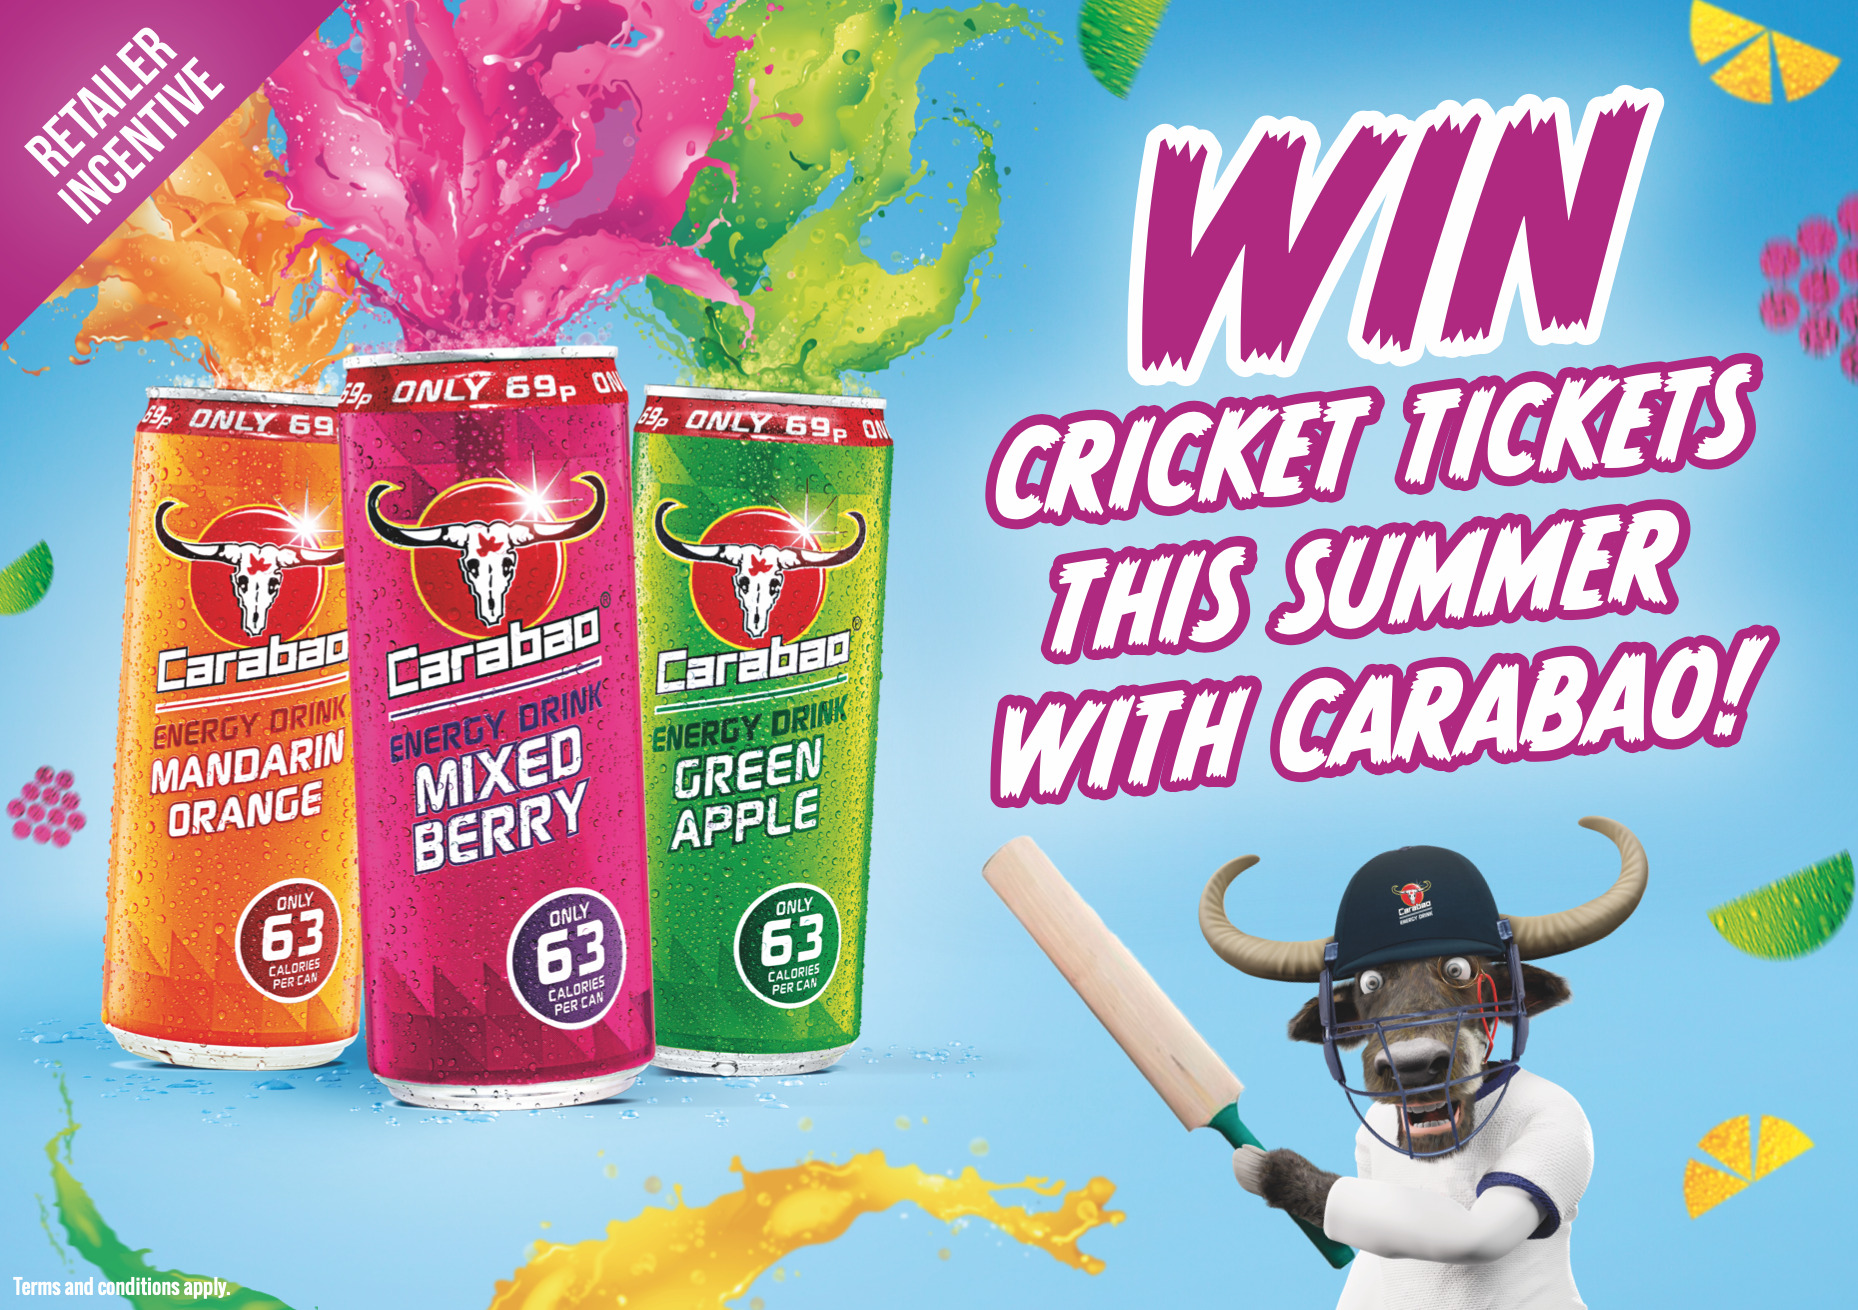 Win England Cricket tickets this summer with Carabao